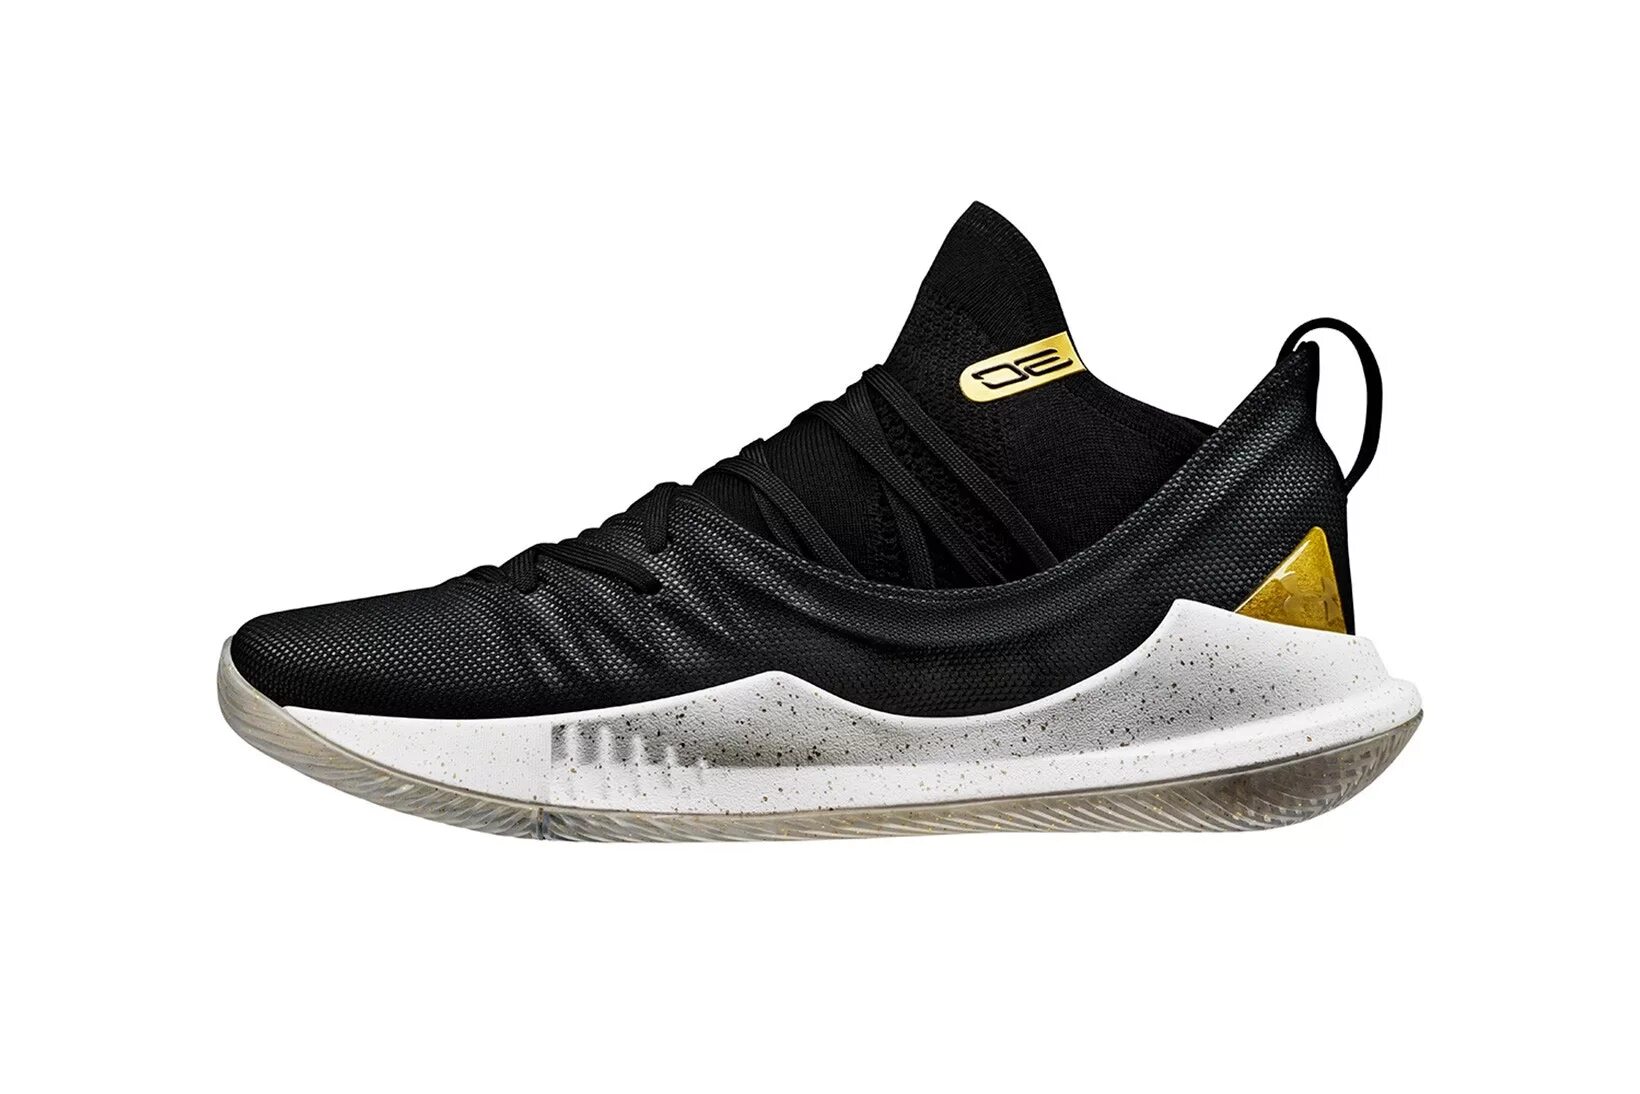 Карри 5. Under Armour Curry 5. Under Armour Curry. Under Armour Curry 5 Black. Stephen Curry кроссовки.